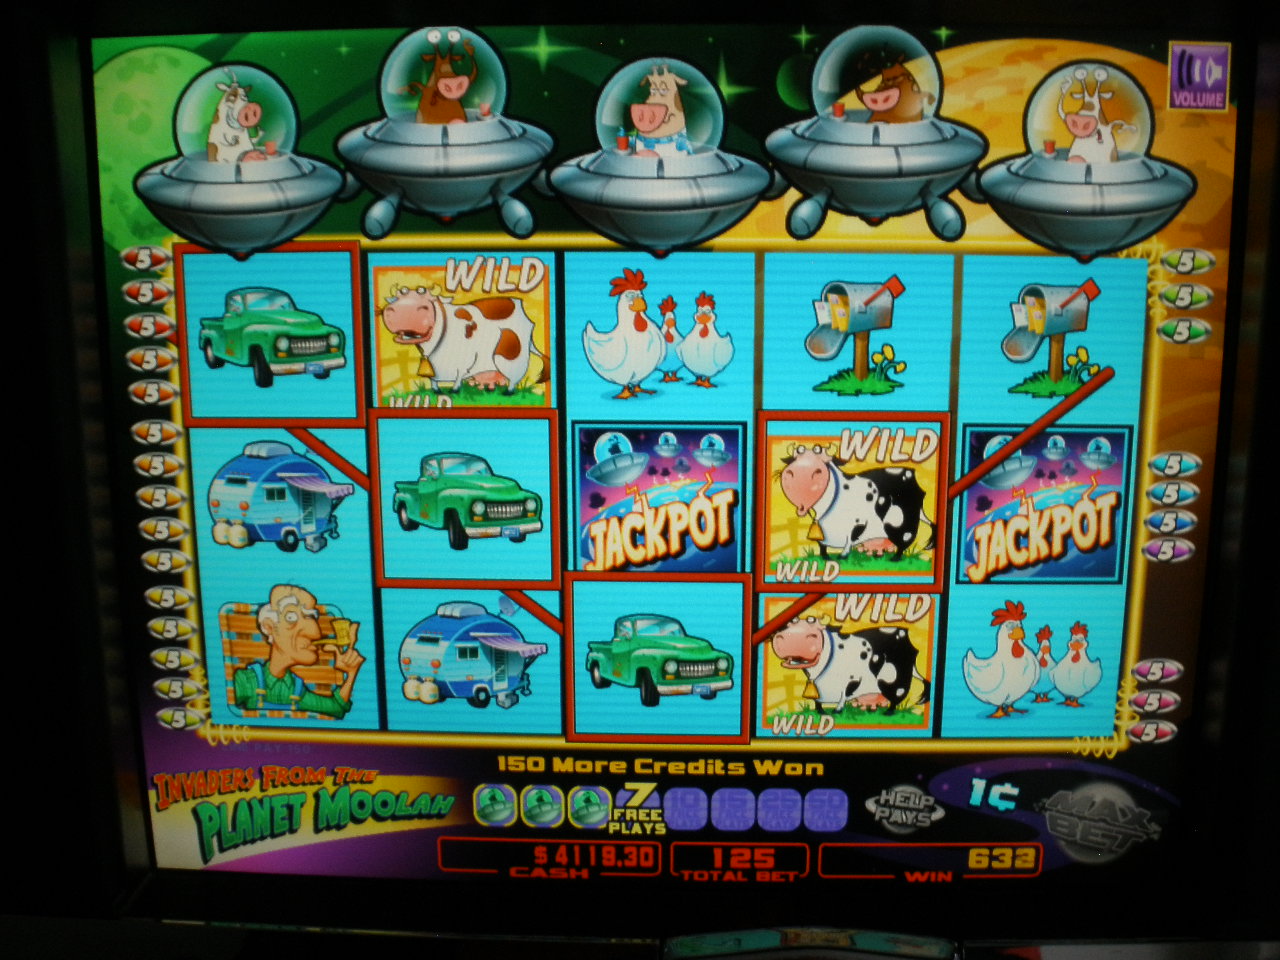 Invaders From The Planet Moolah Slot Machine